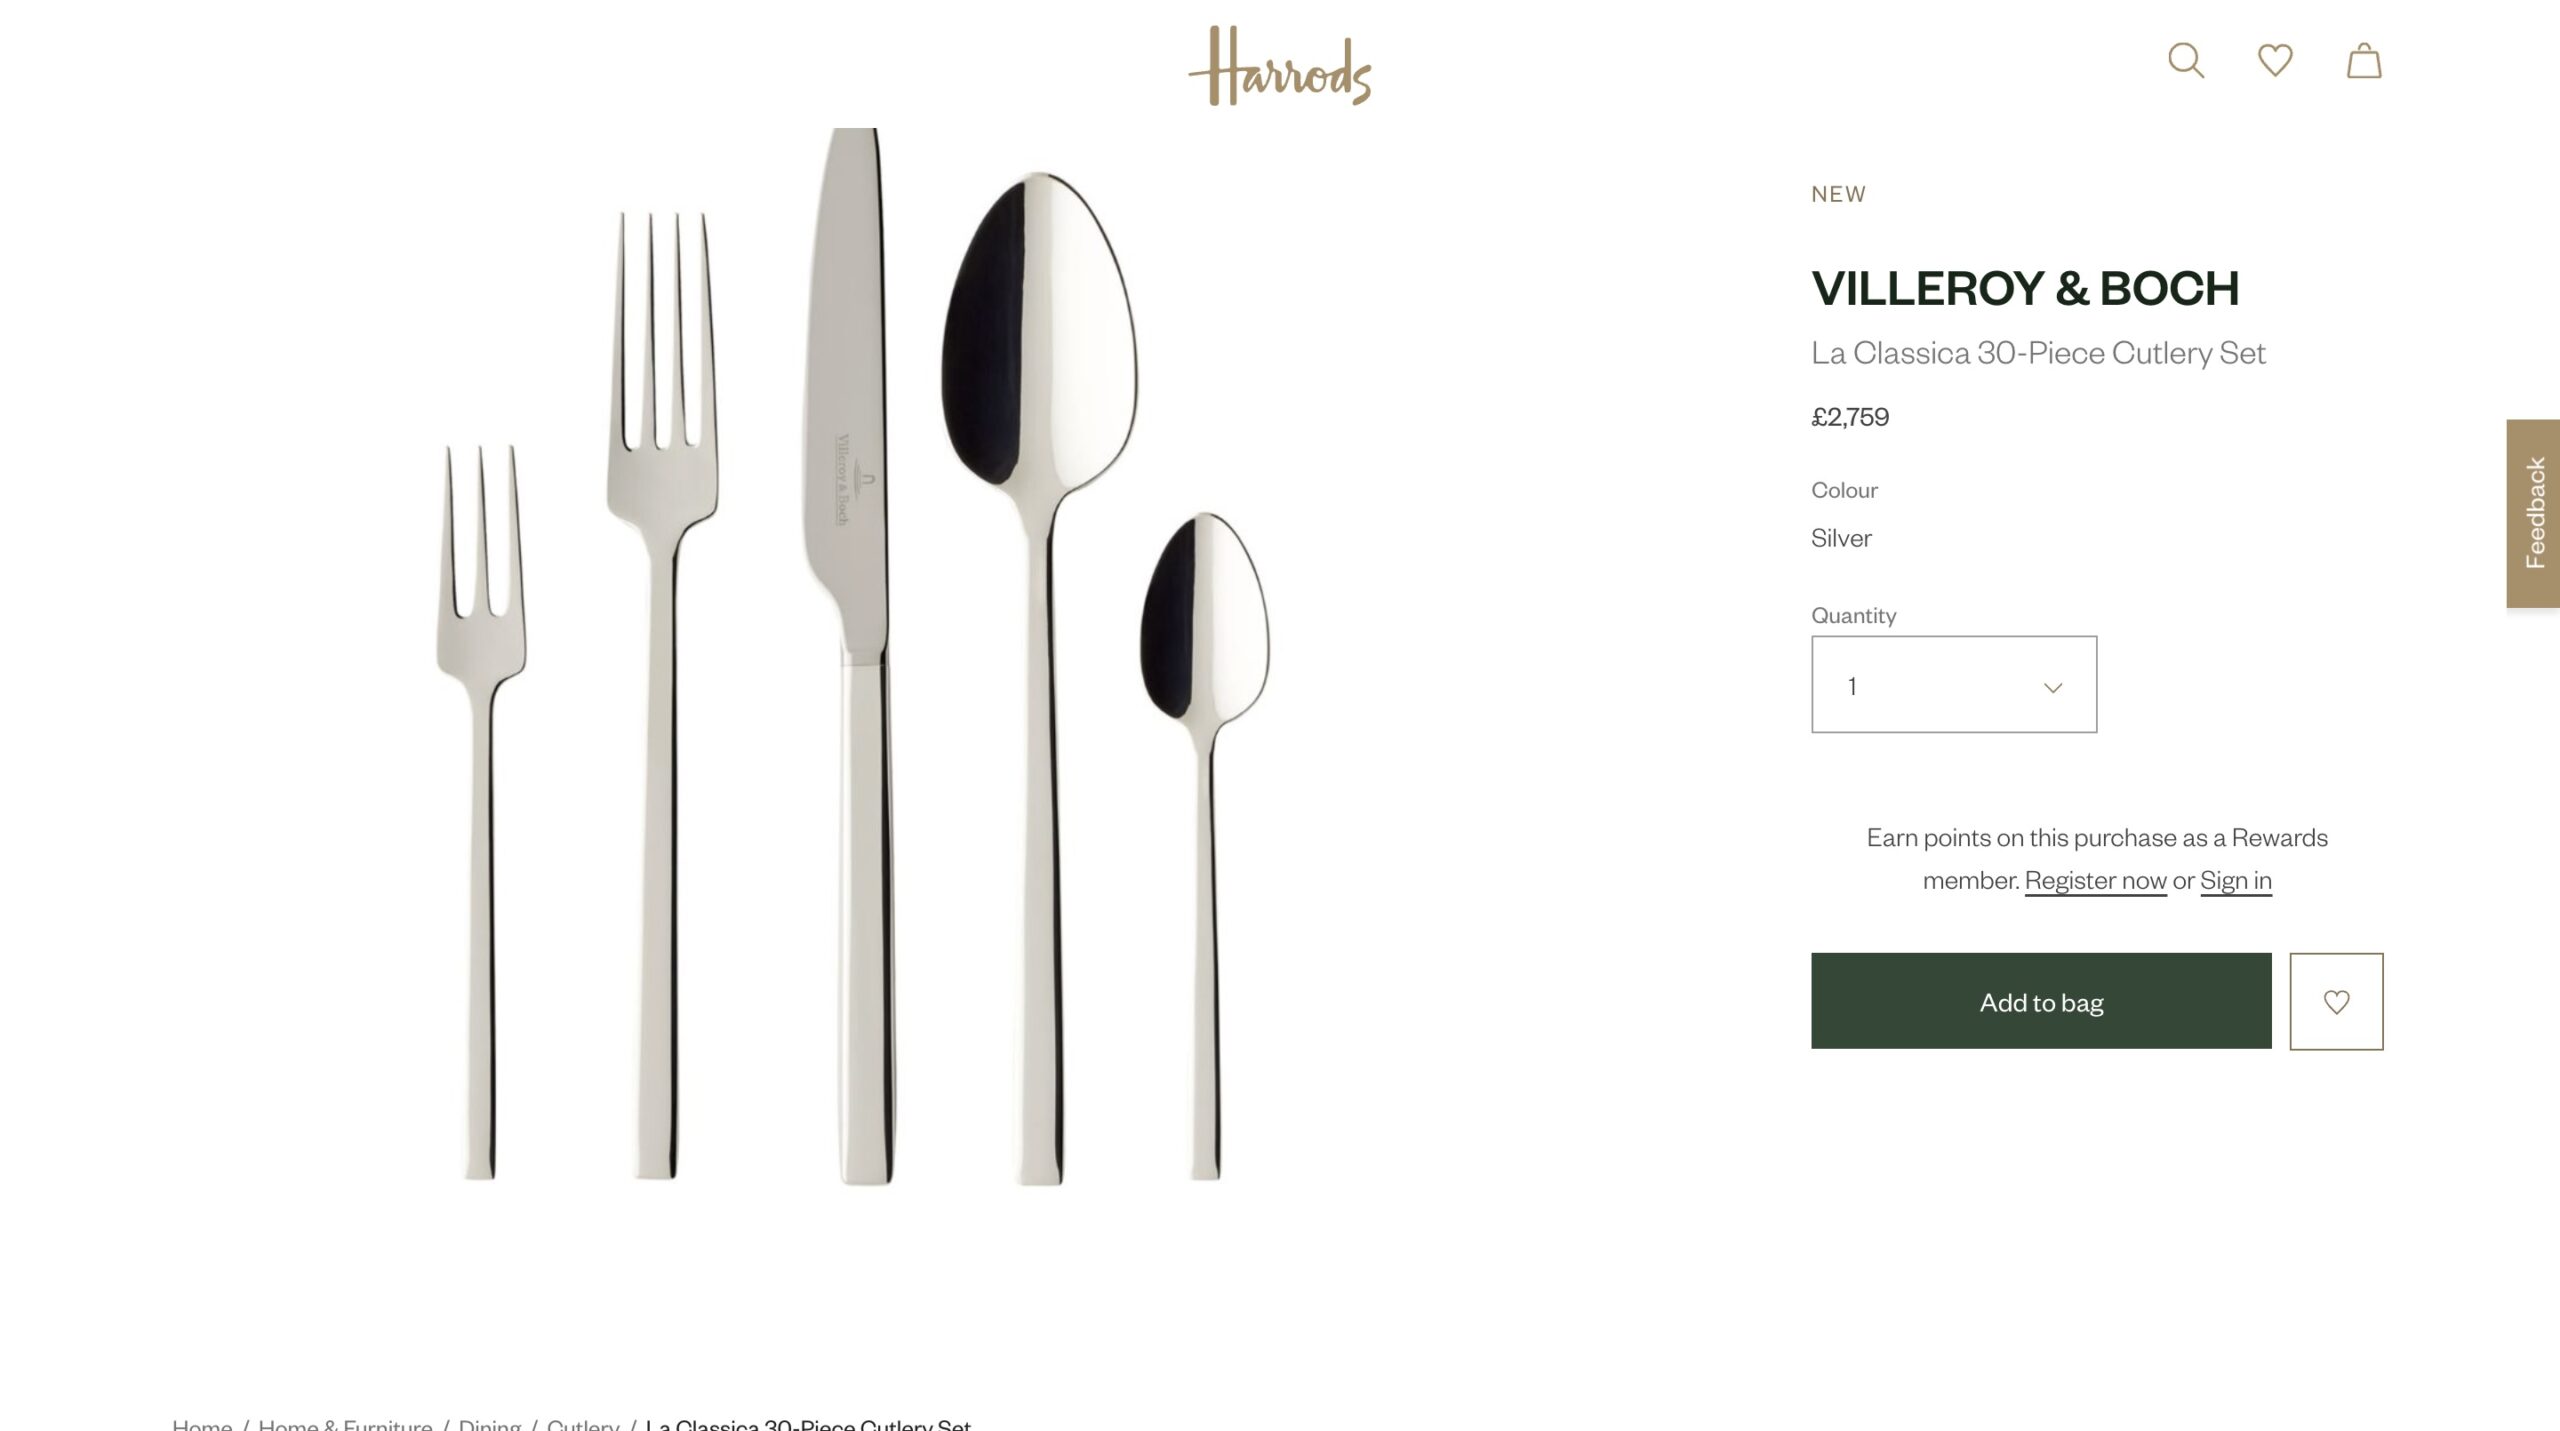 Harrods is selling a £2,759 cutlery set that resembles a £37 set from Sainsbury's. The 30-piece Villeroy & Boch set is made from silver-plated stainless steel, offering a luxurious touch for posh kitchens.